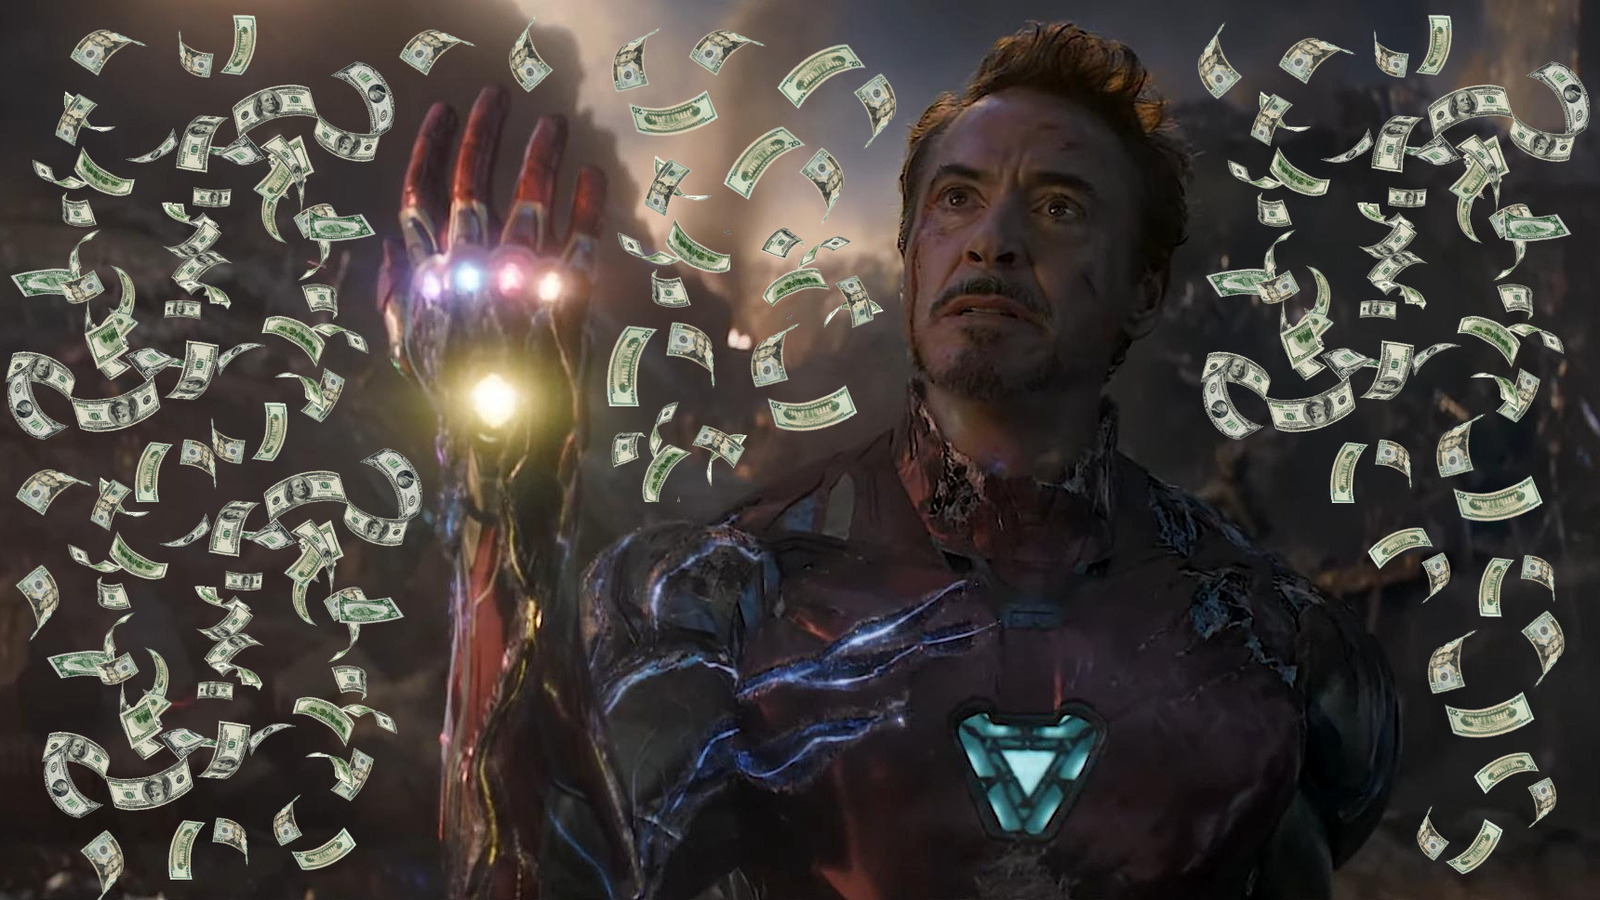 5 Years Ago, Avengers: Endgame Took The MCU To A Record-Shattering Box Office Peak